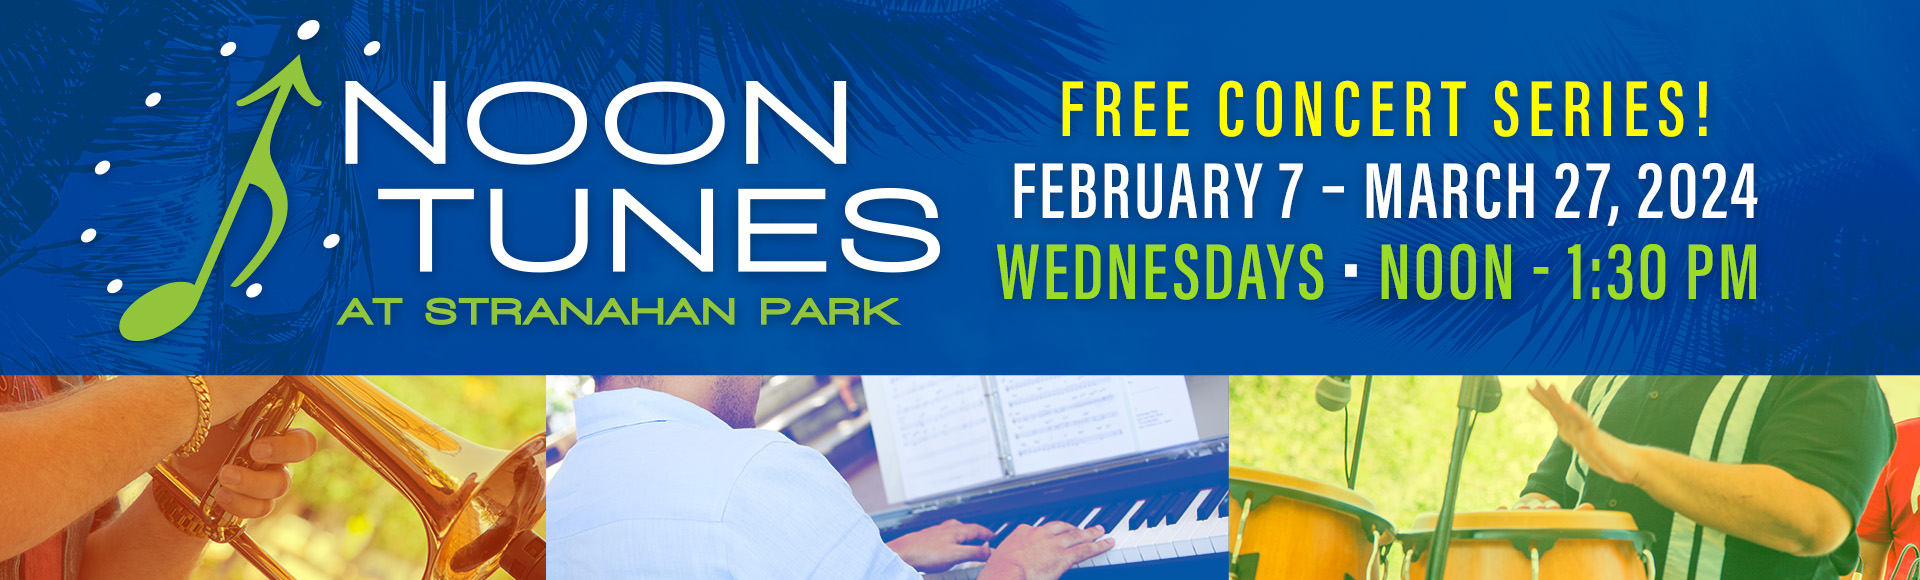 Noon Tunes free concert series. February 2 to March 23, 2022. Wednesdays. Noon to 1:30 PM